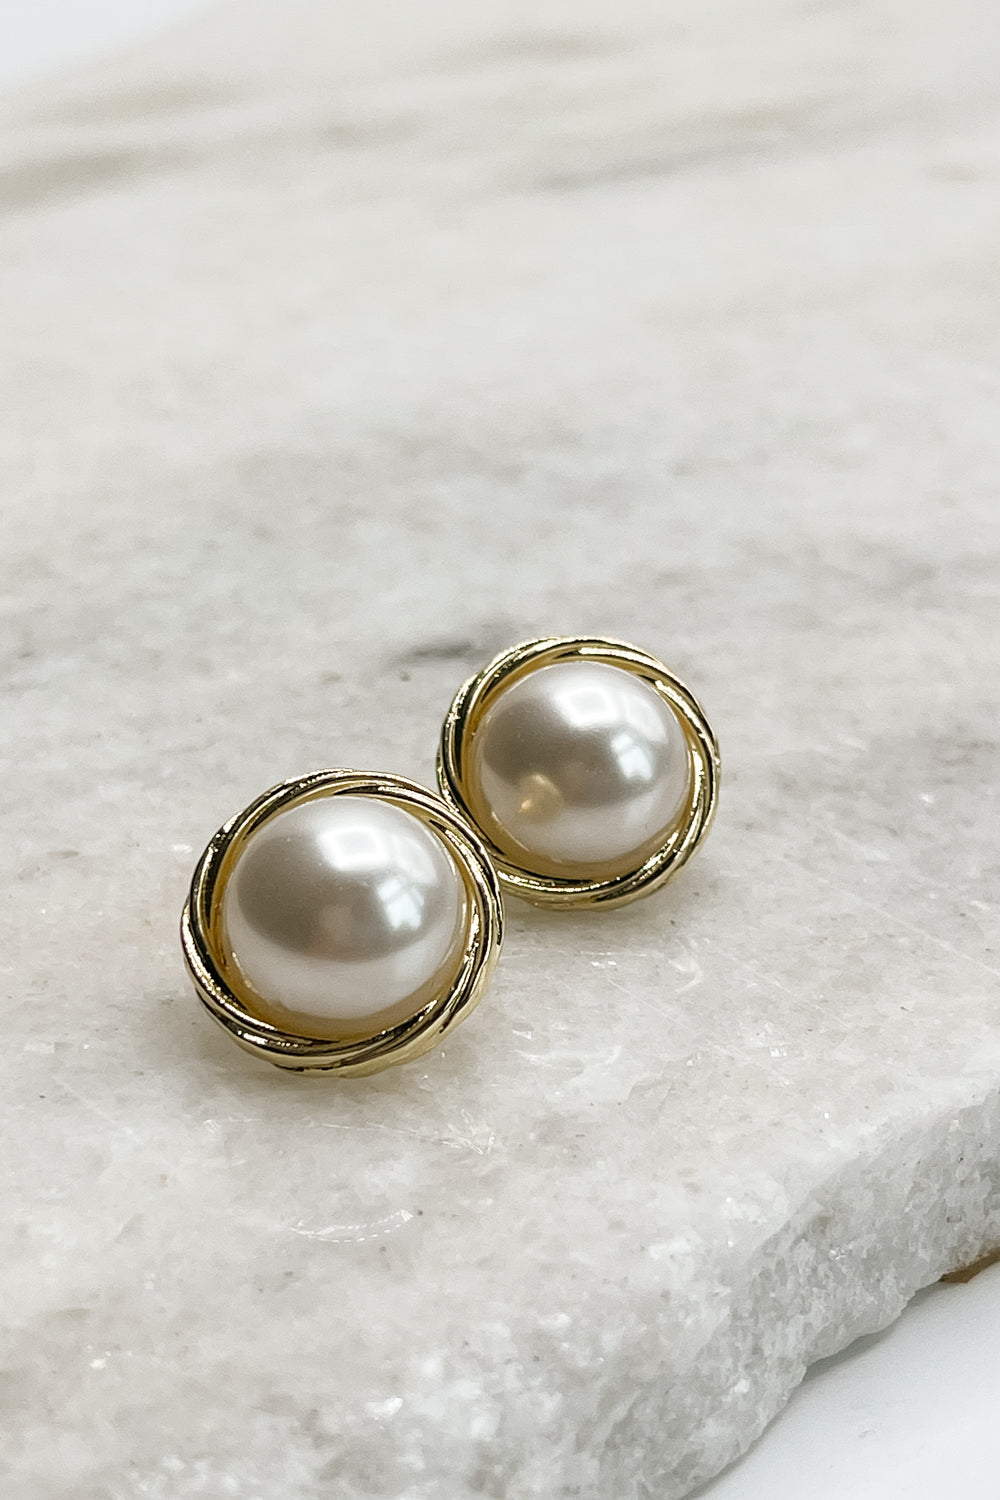 Close up of Camden Pearl Stud Earrings, pearl studs wrapped in gold.